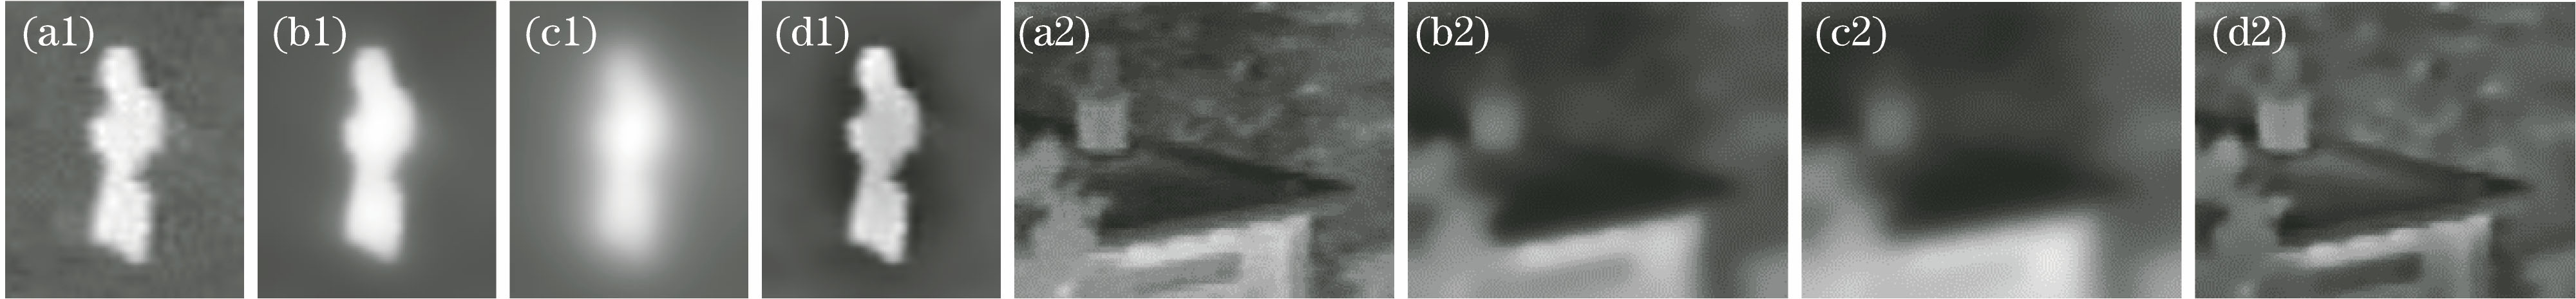 Partial enlarged views of Fig.1. (a1)(a2) Infrared source image; (b1)(b2) low-frequency subband after filtering; (c1)(c2) low-frequency approximate component; (d1)(d2) strong edge component